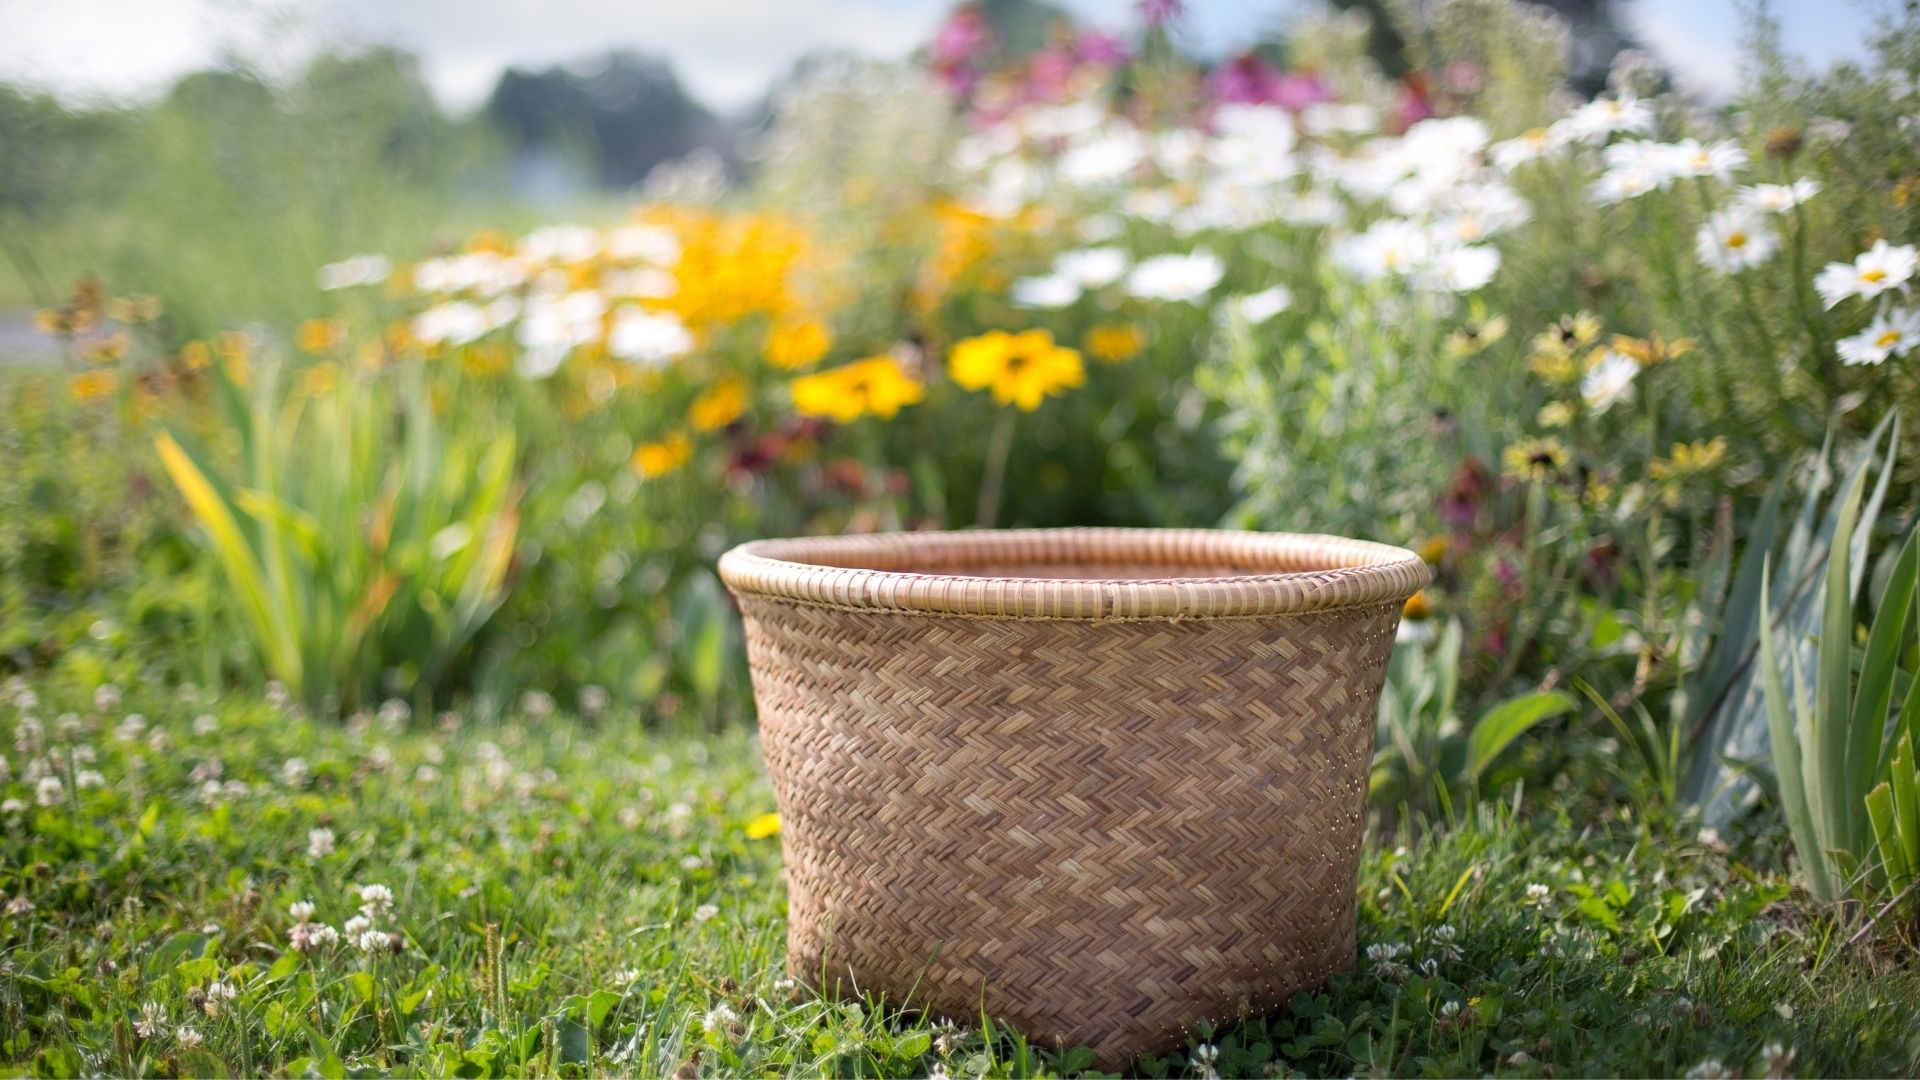 How To Clean Wicker Baskets